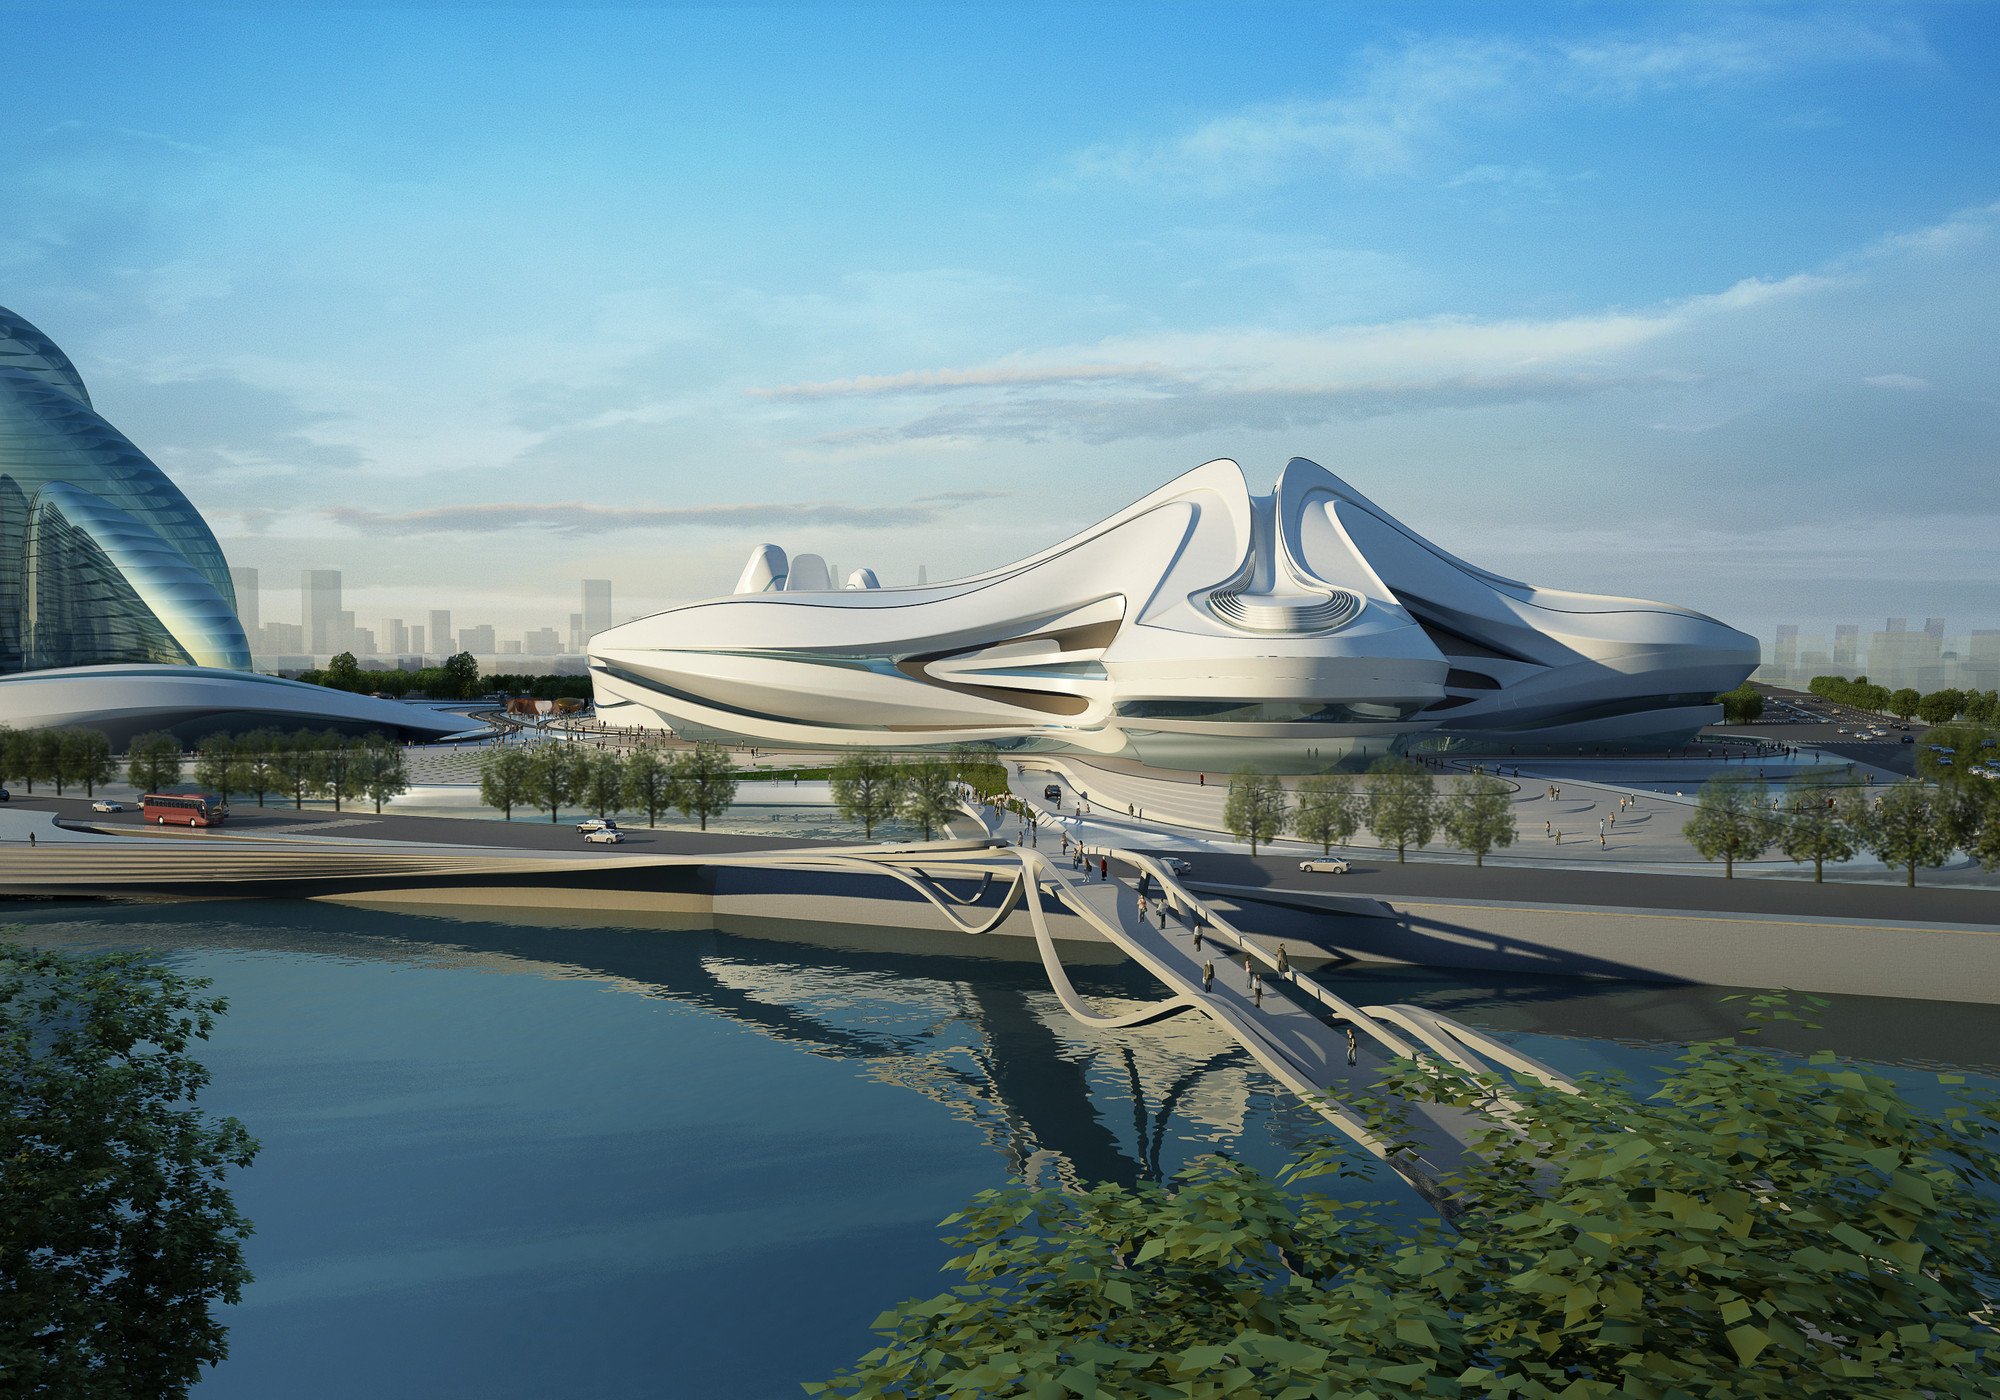 Changsha International Cultural and Art Centre by the river Meixi